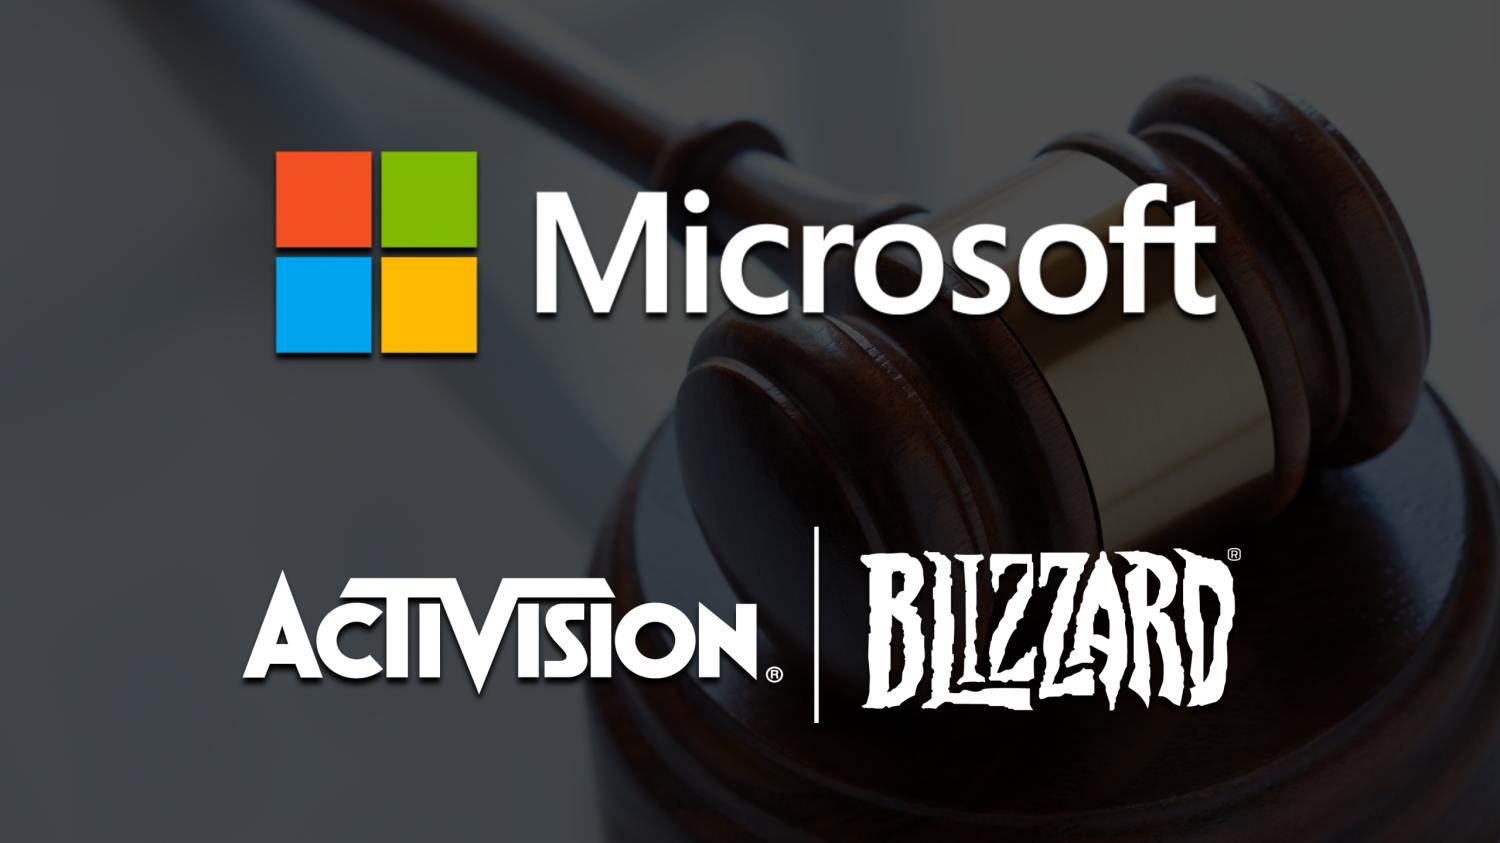 Microsoft Activision Merger Deadline Extended to October 18